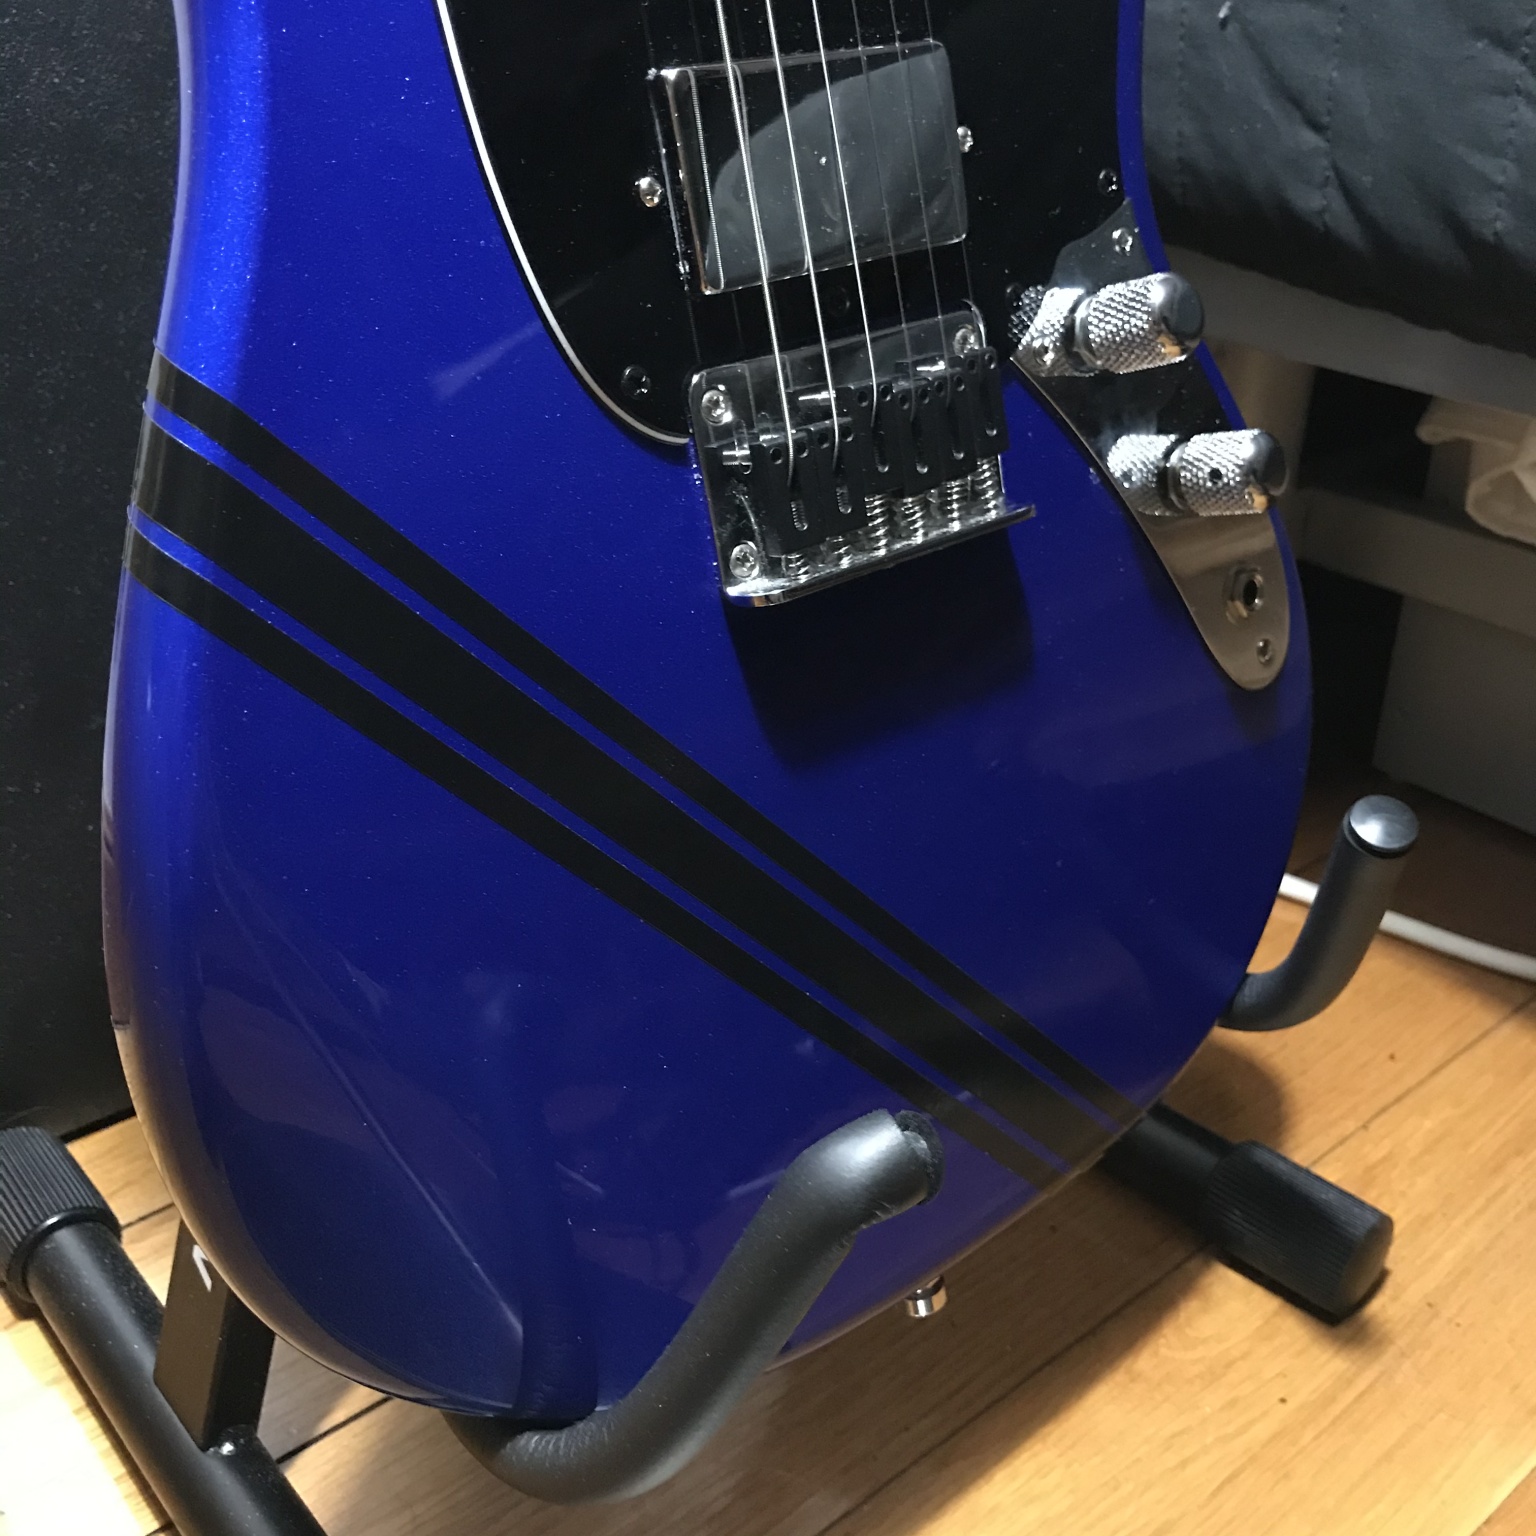 Squier Bullet Mustang - final touch: a racing stripe